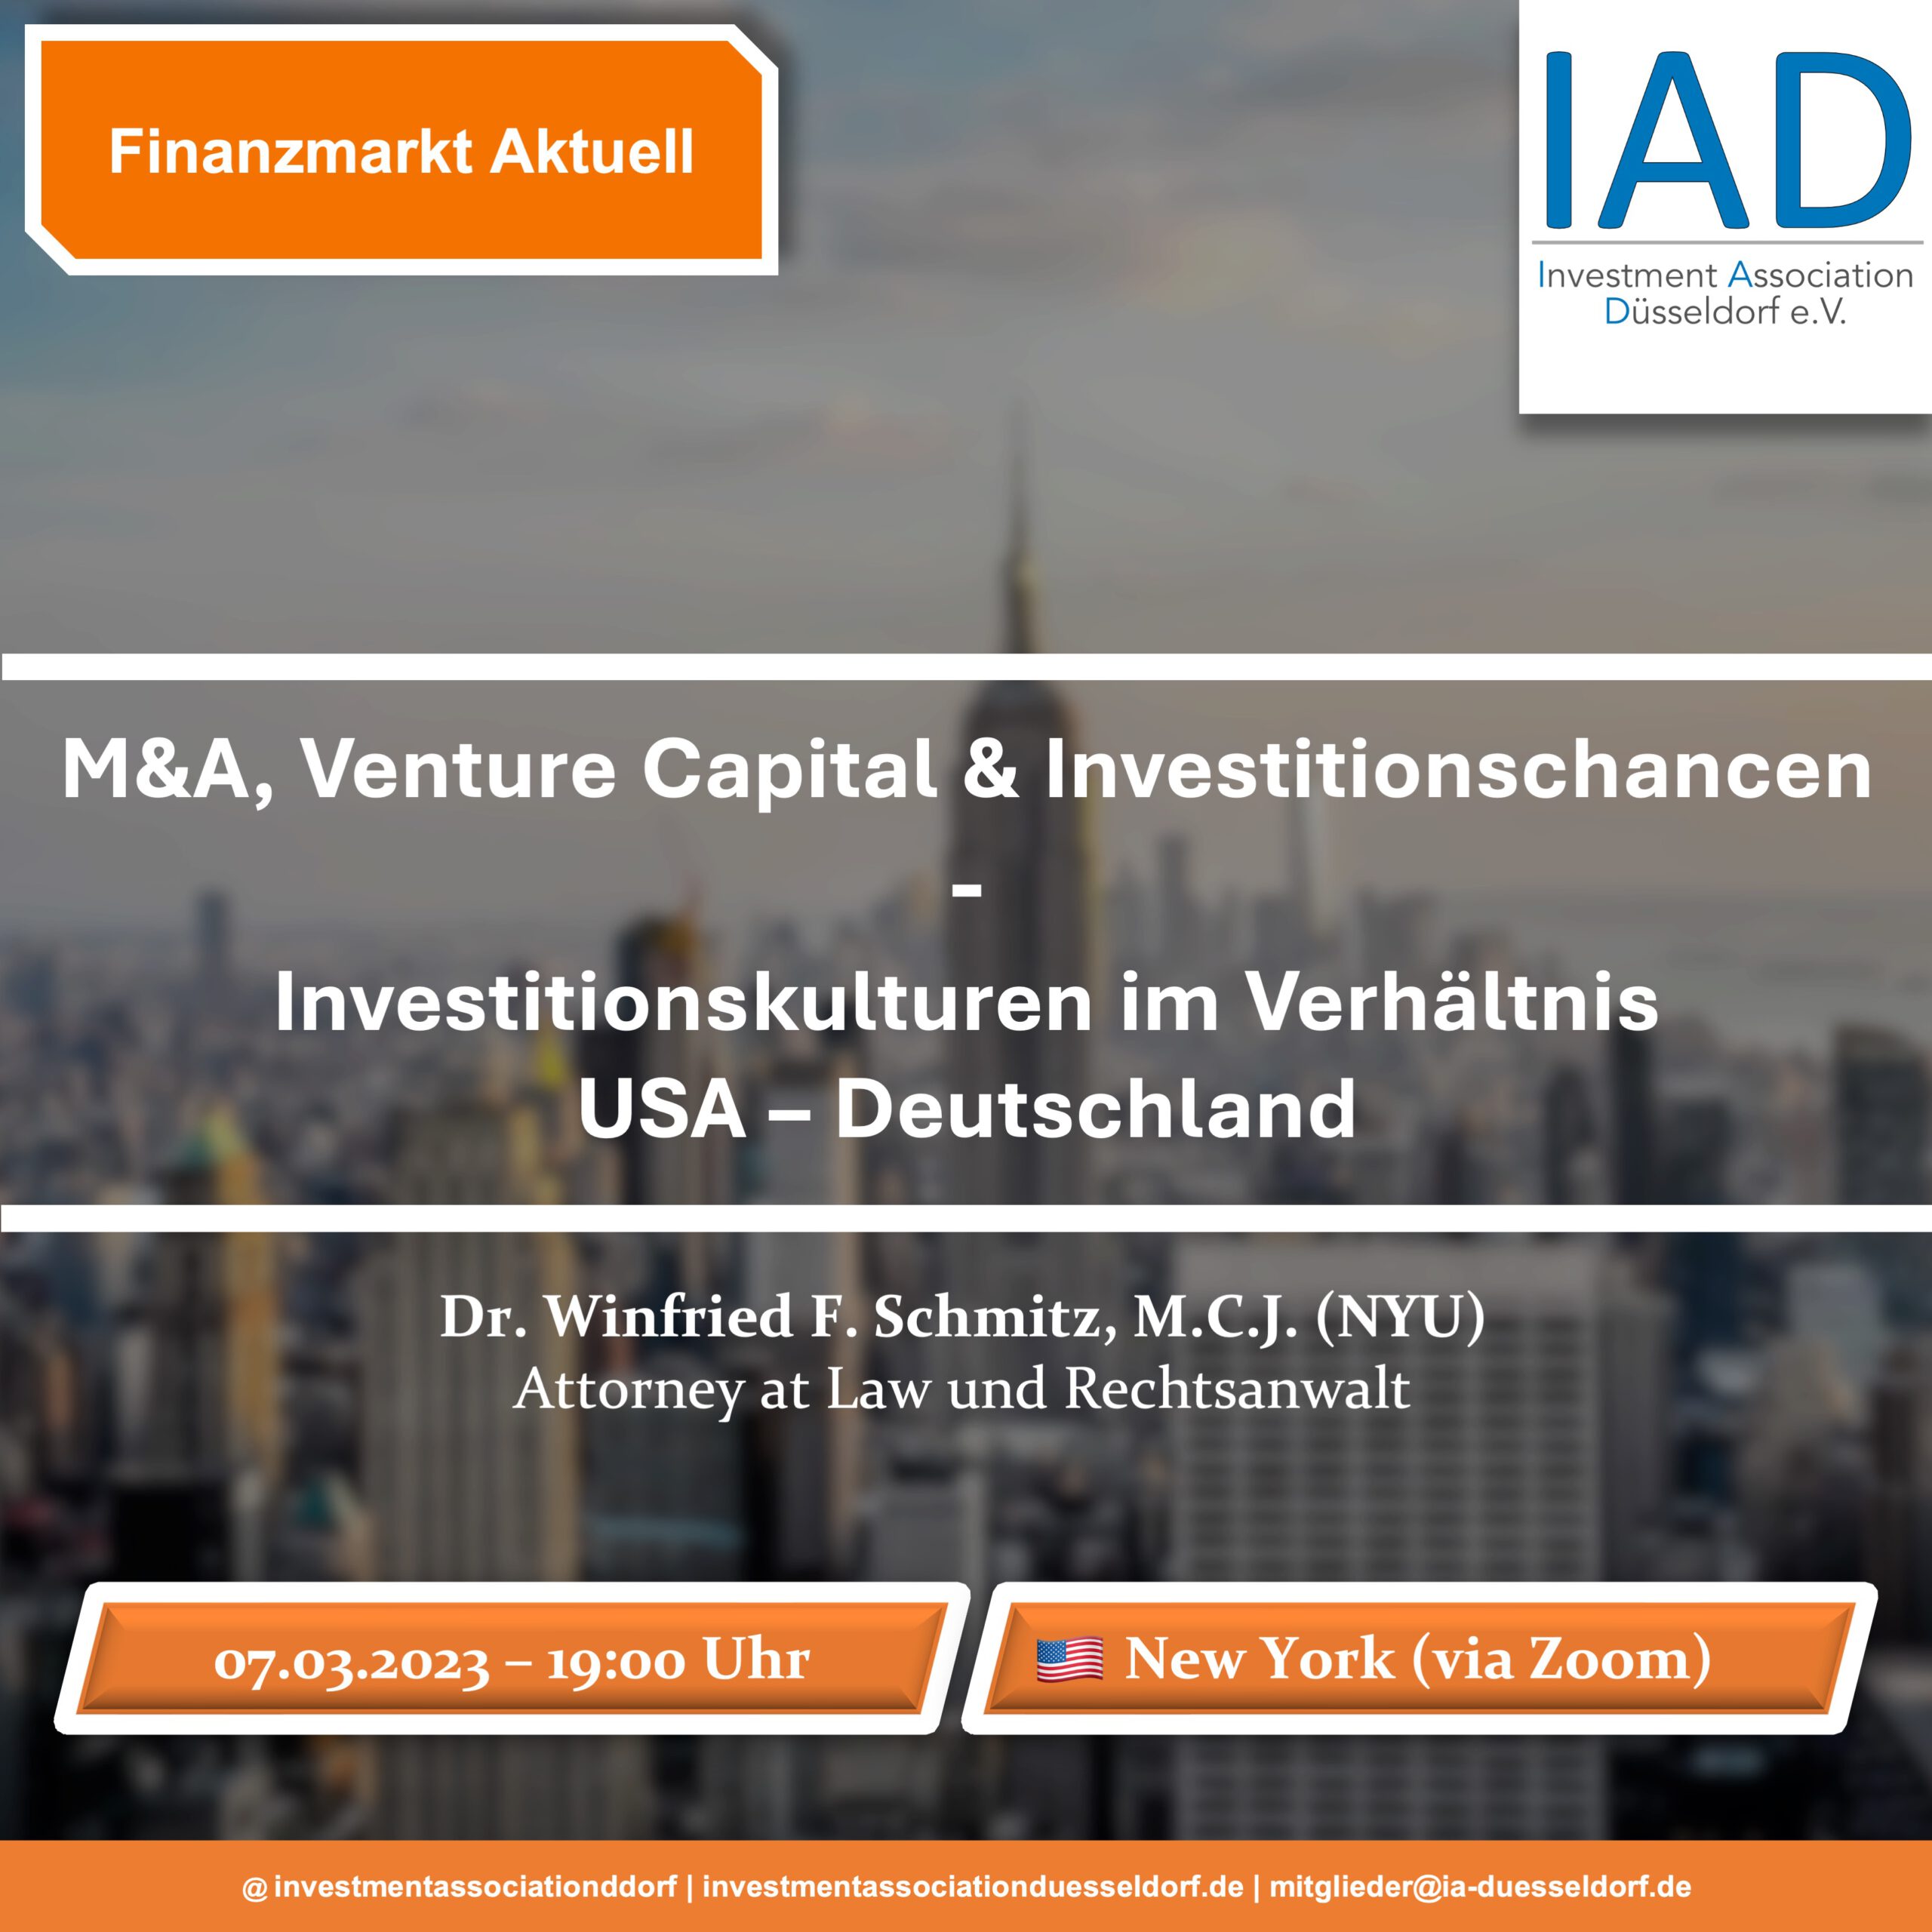 You are currently viewing Finanzmarkt Aktuell (07.03.2023 – 19:00 Uhr)